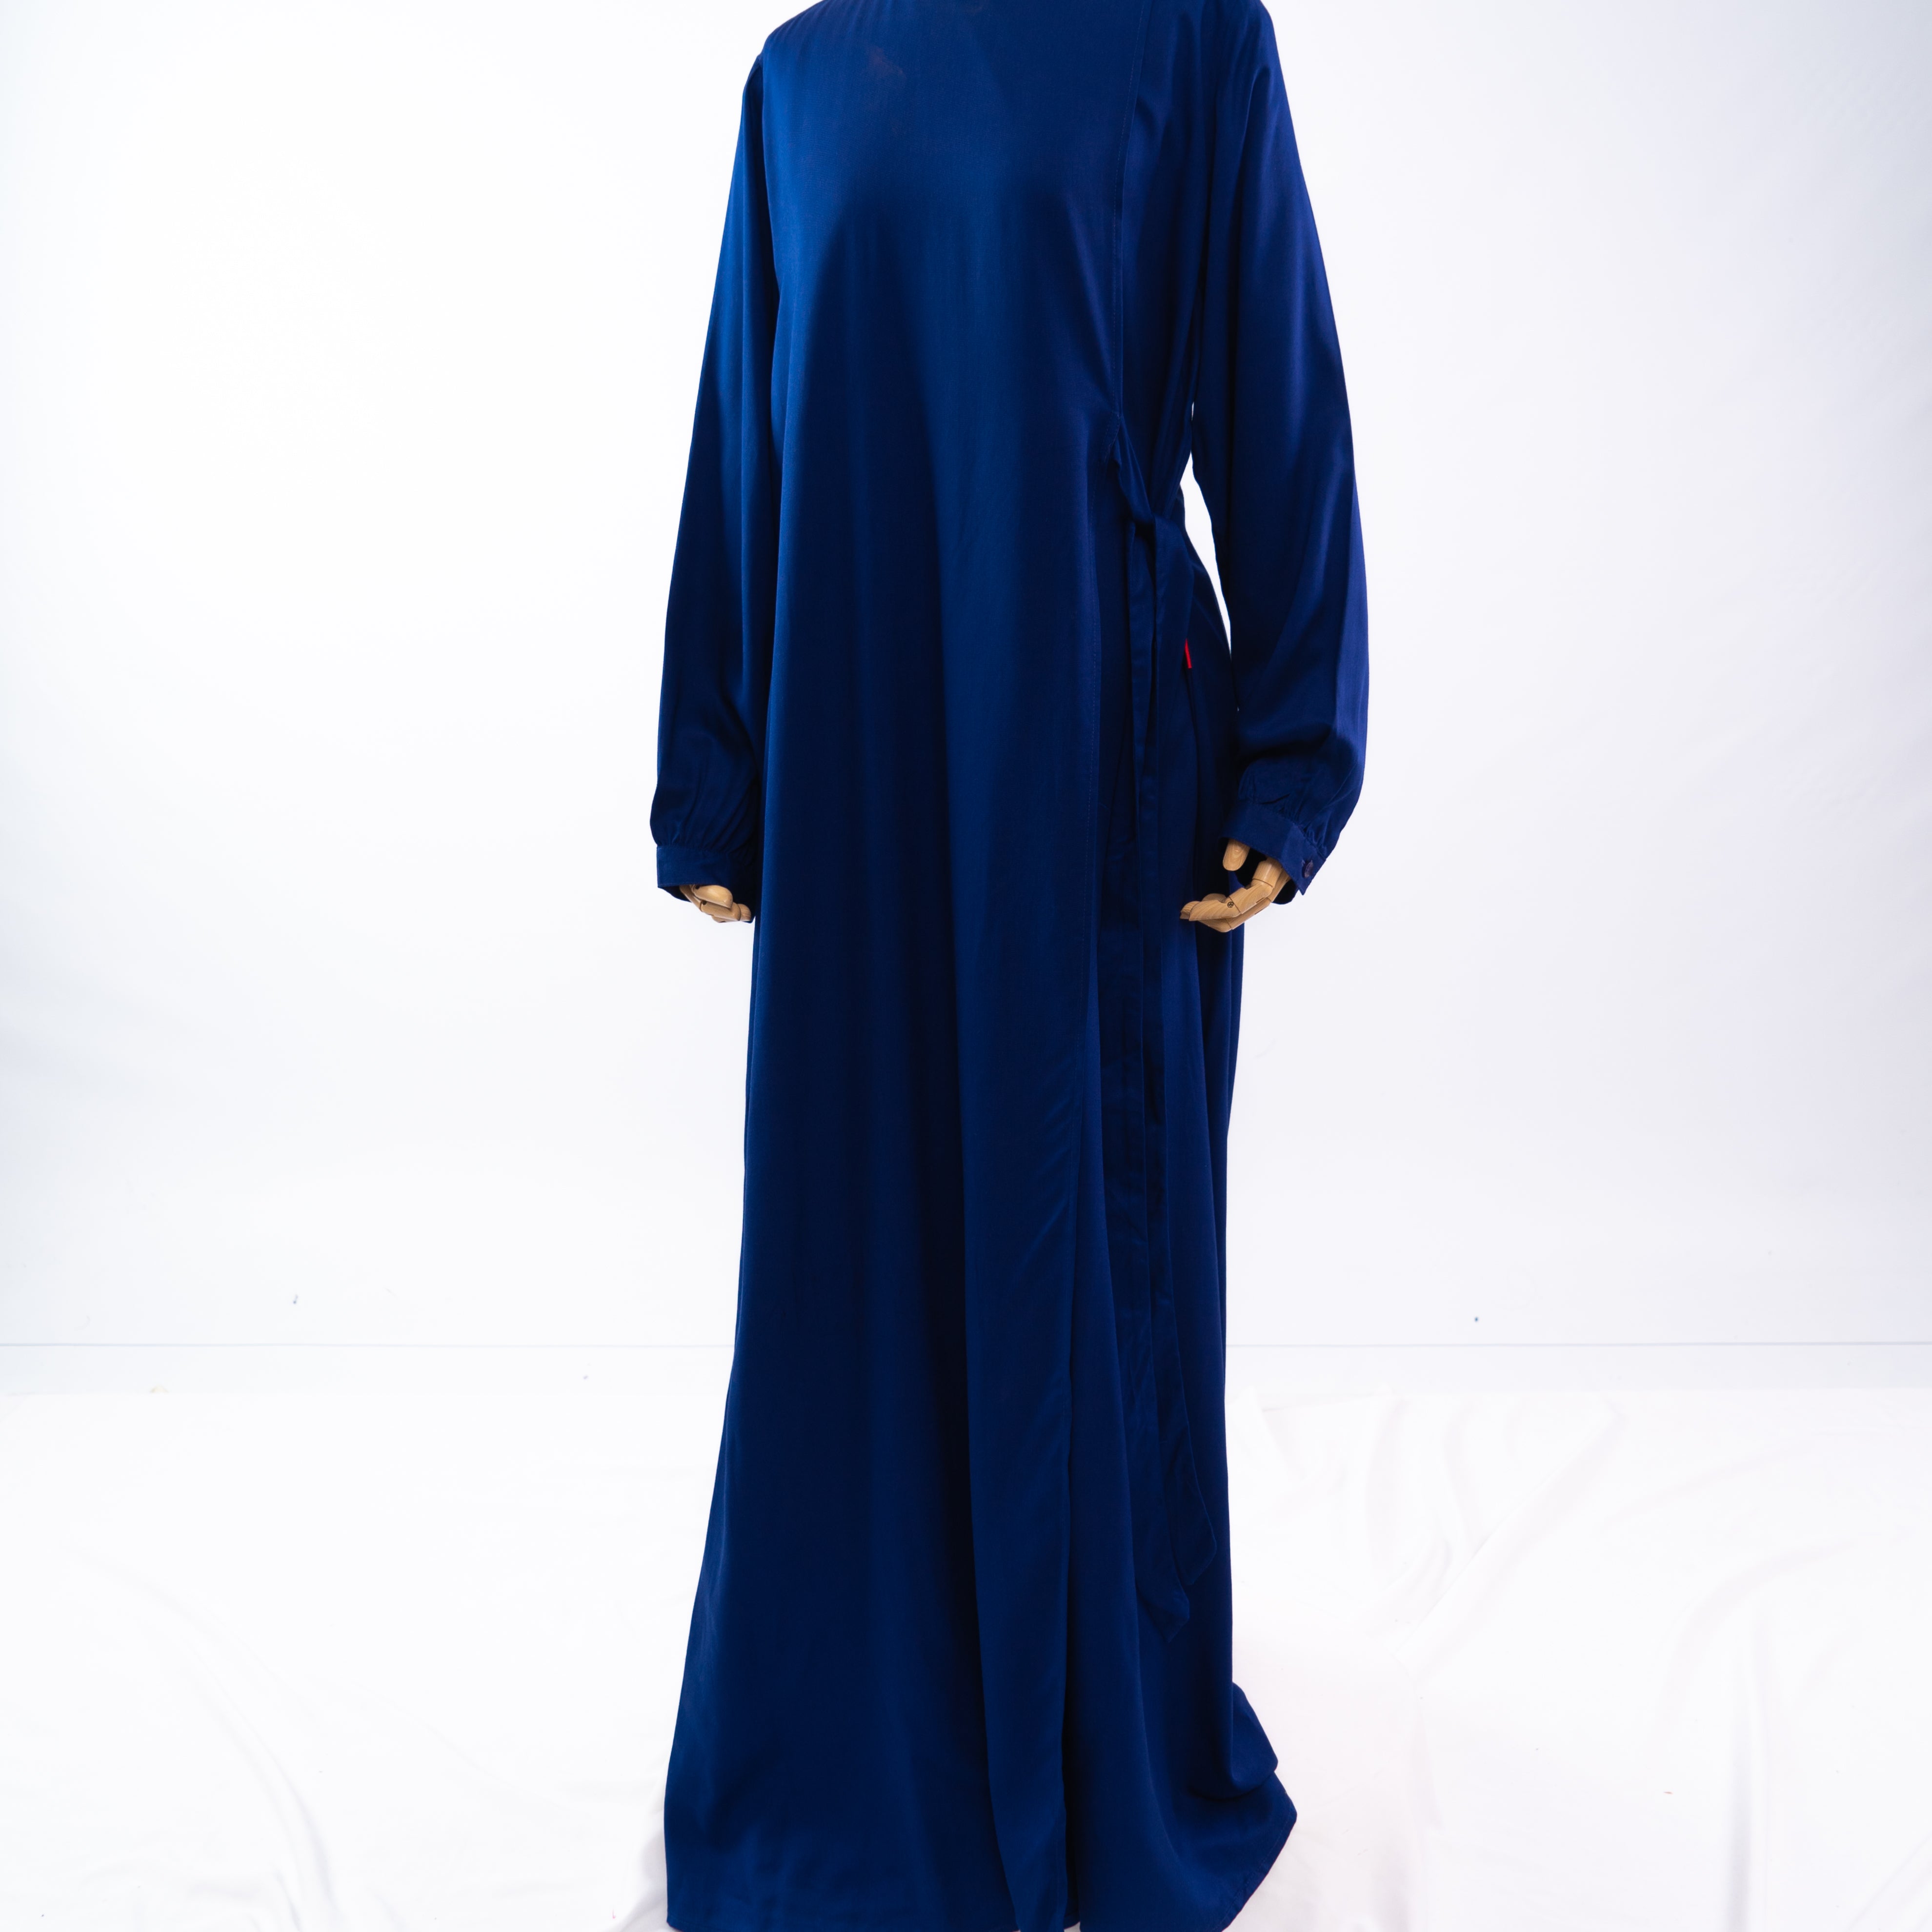 Dauky Gamis Limited Edition 33